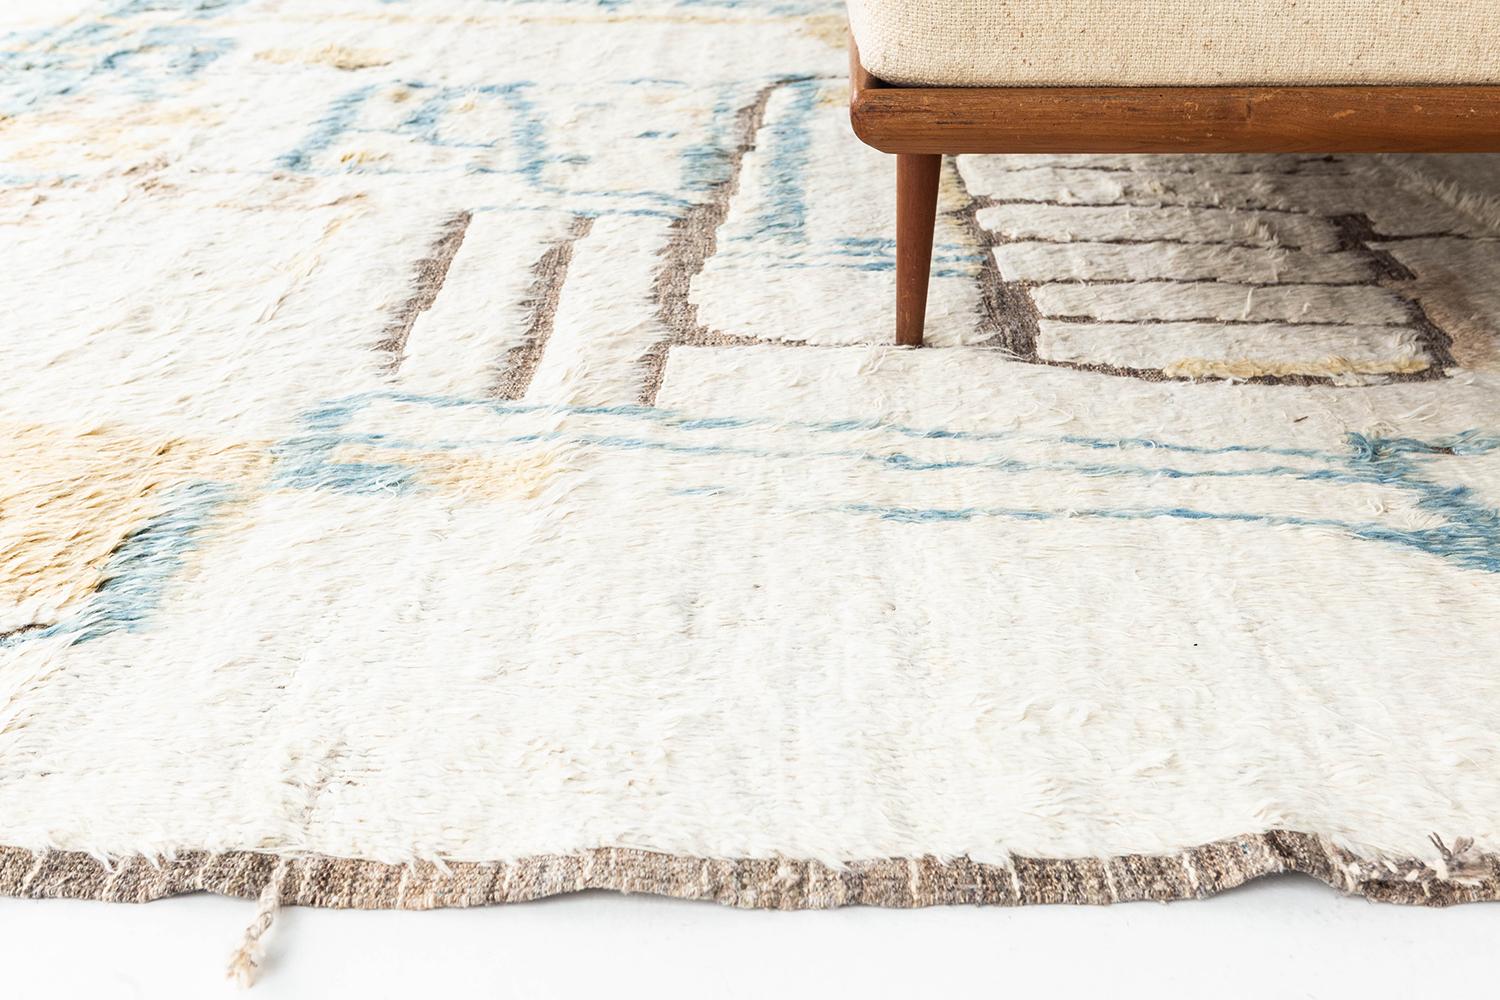 Meliska' is a beautifully textured rug with irregular motifs inspired from the Atlas Mountains of Morocco. Natural blush, golden yellow, and blue surrounded by ivory shag work cohesively to make for a great contemporary interpretation for the modern